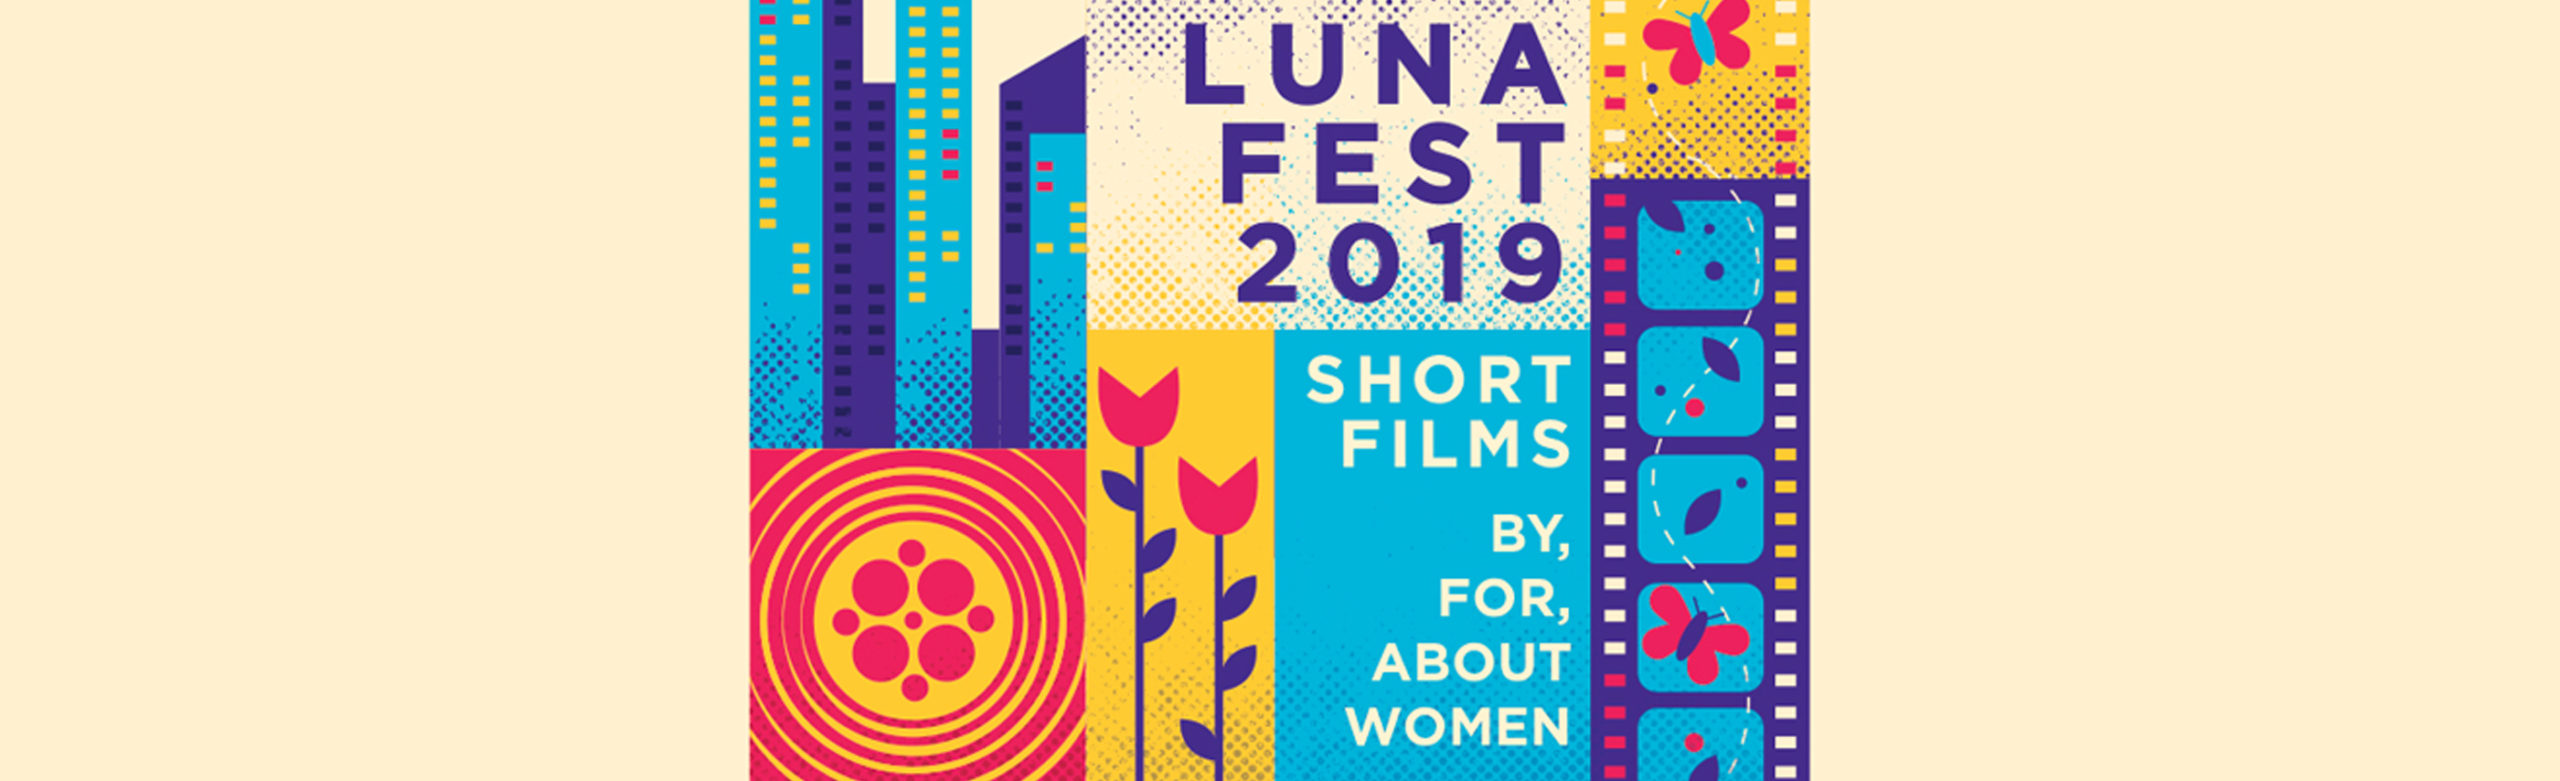 Event Info: Lunafest at the Wilma Image